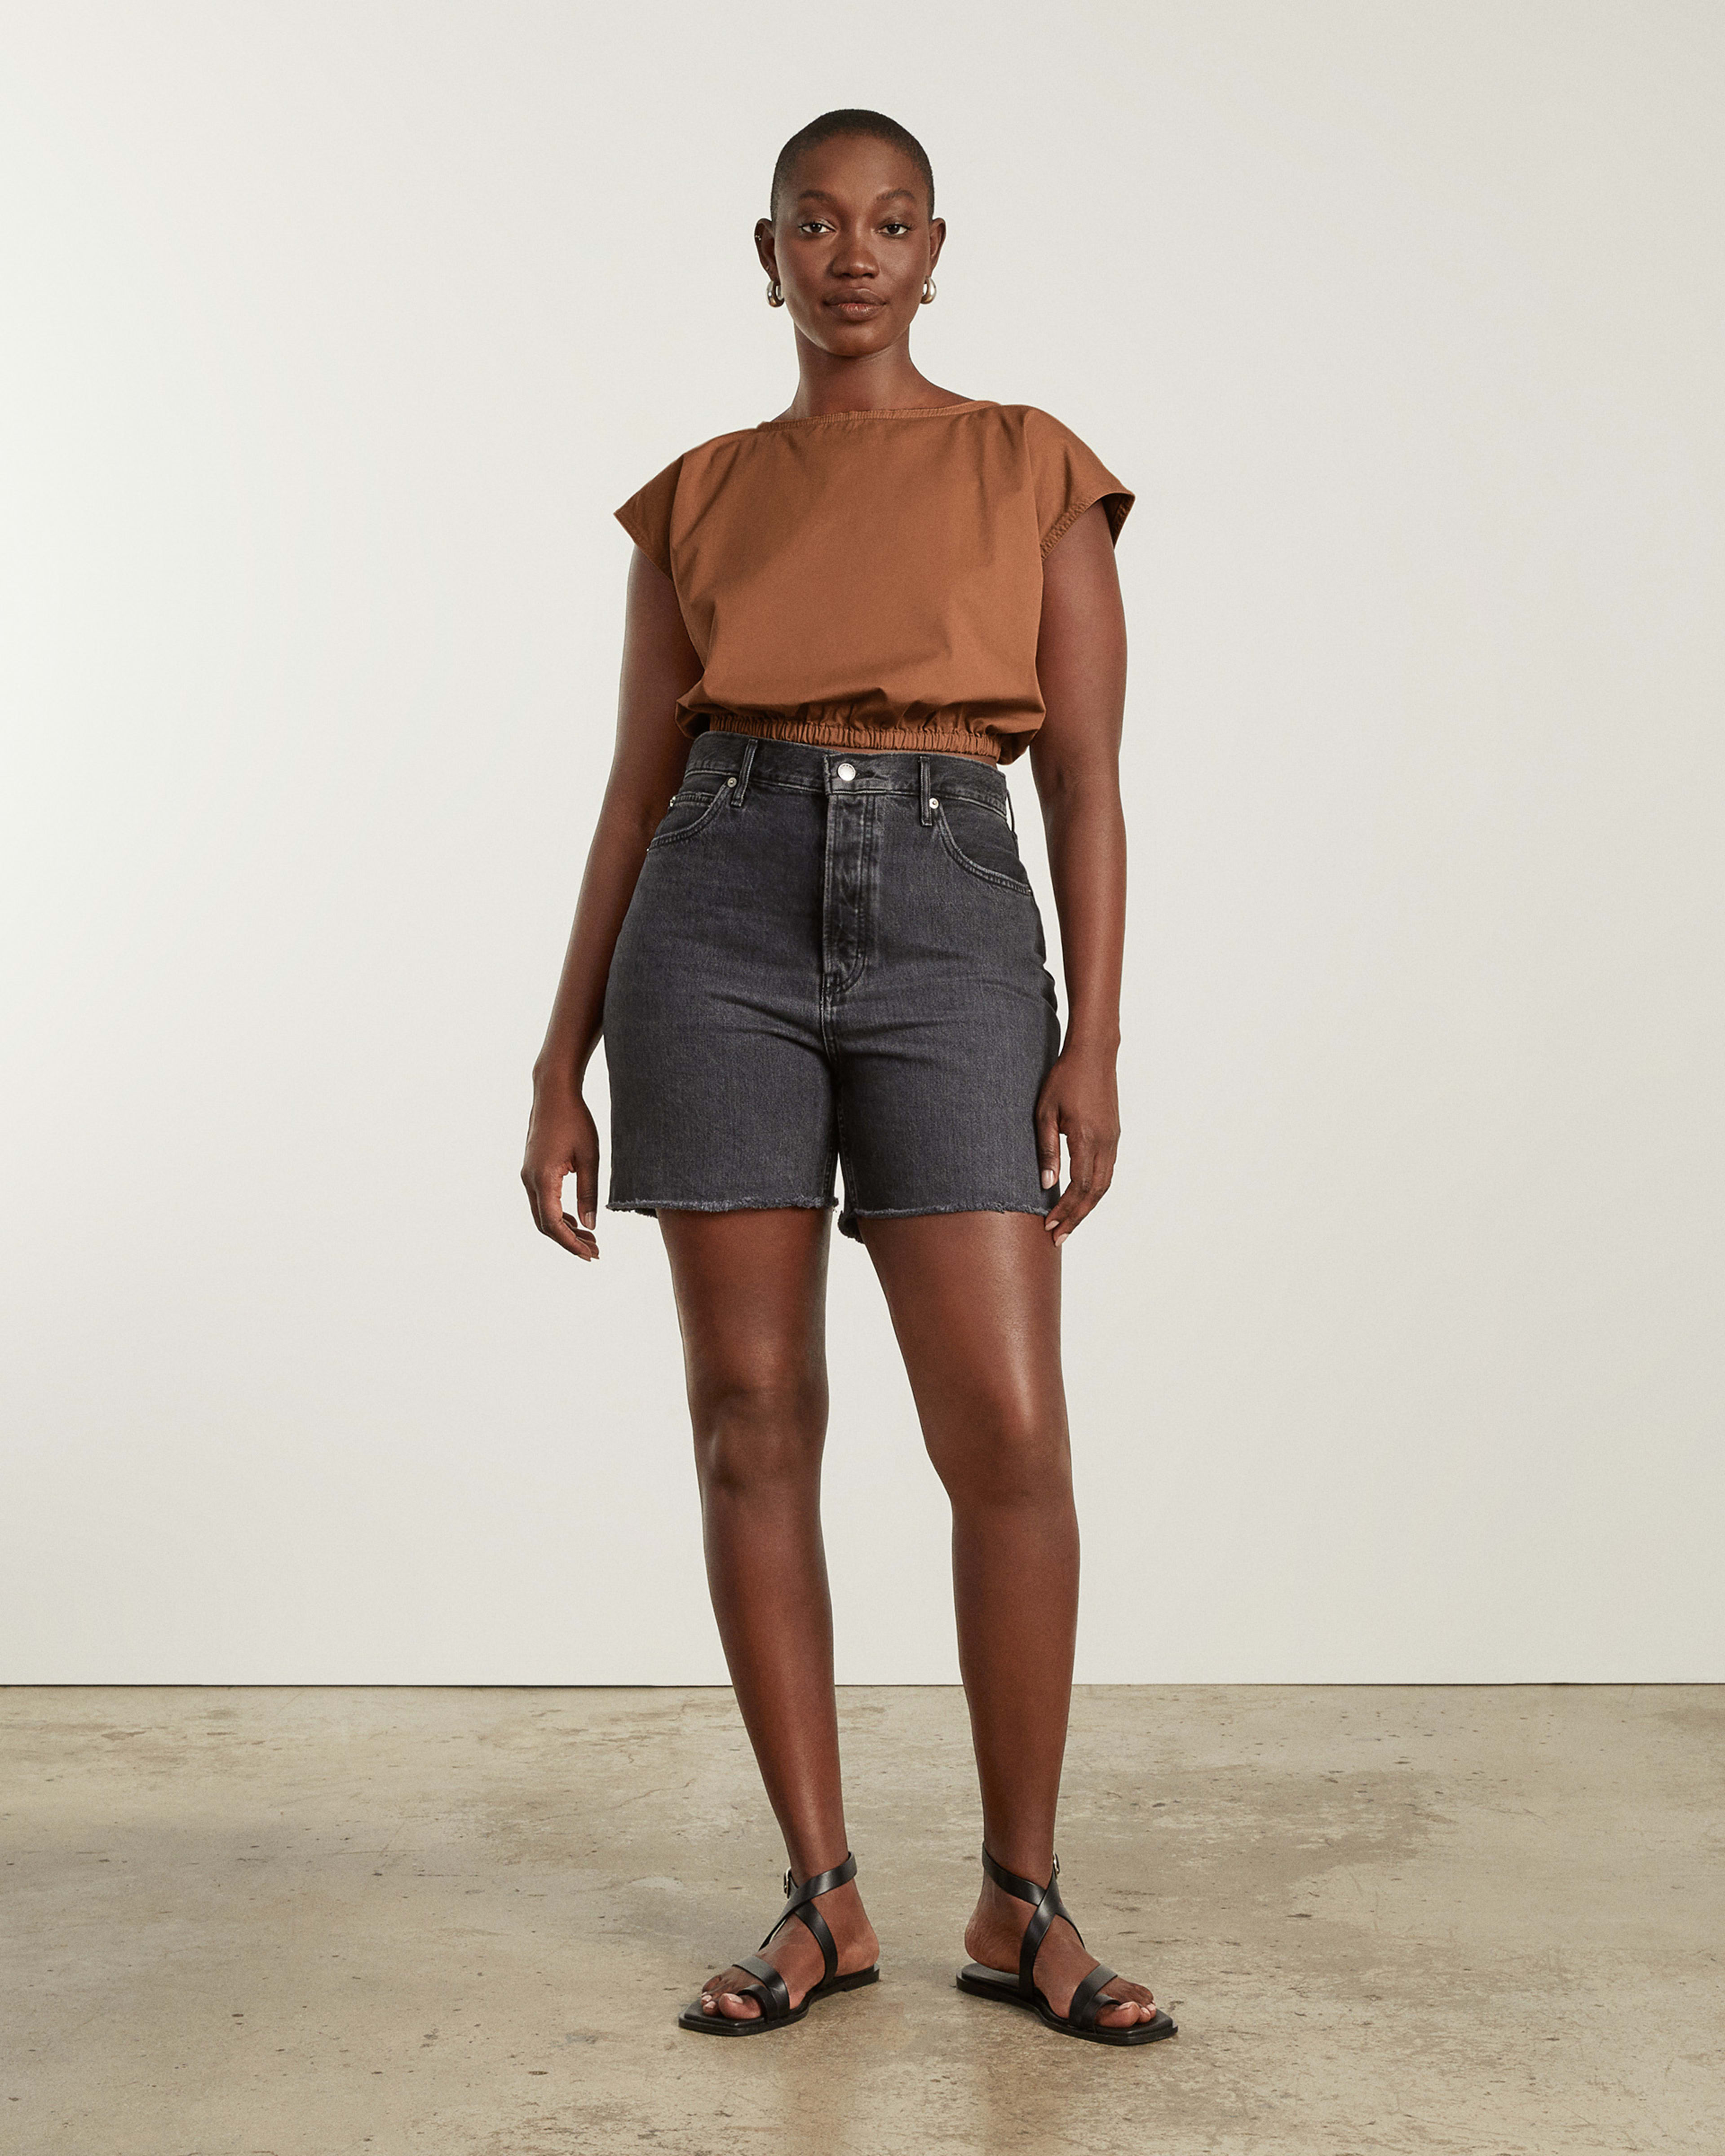 The Bubble Top Tawny Brown – Everlane